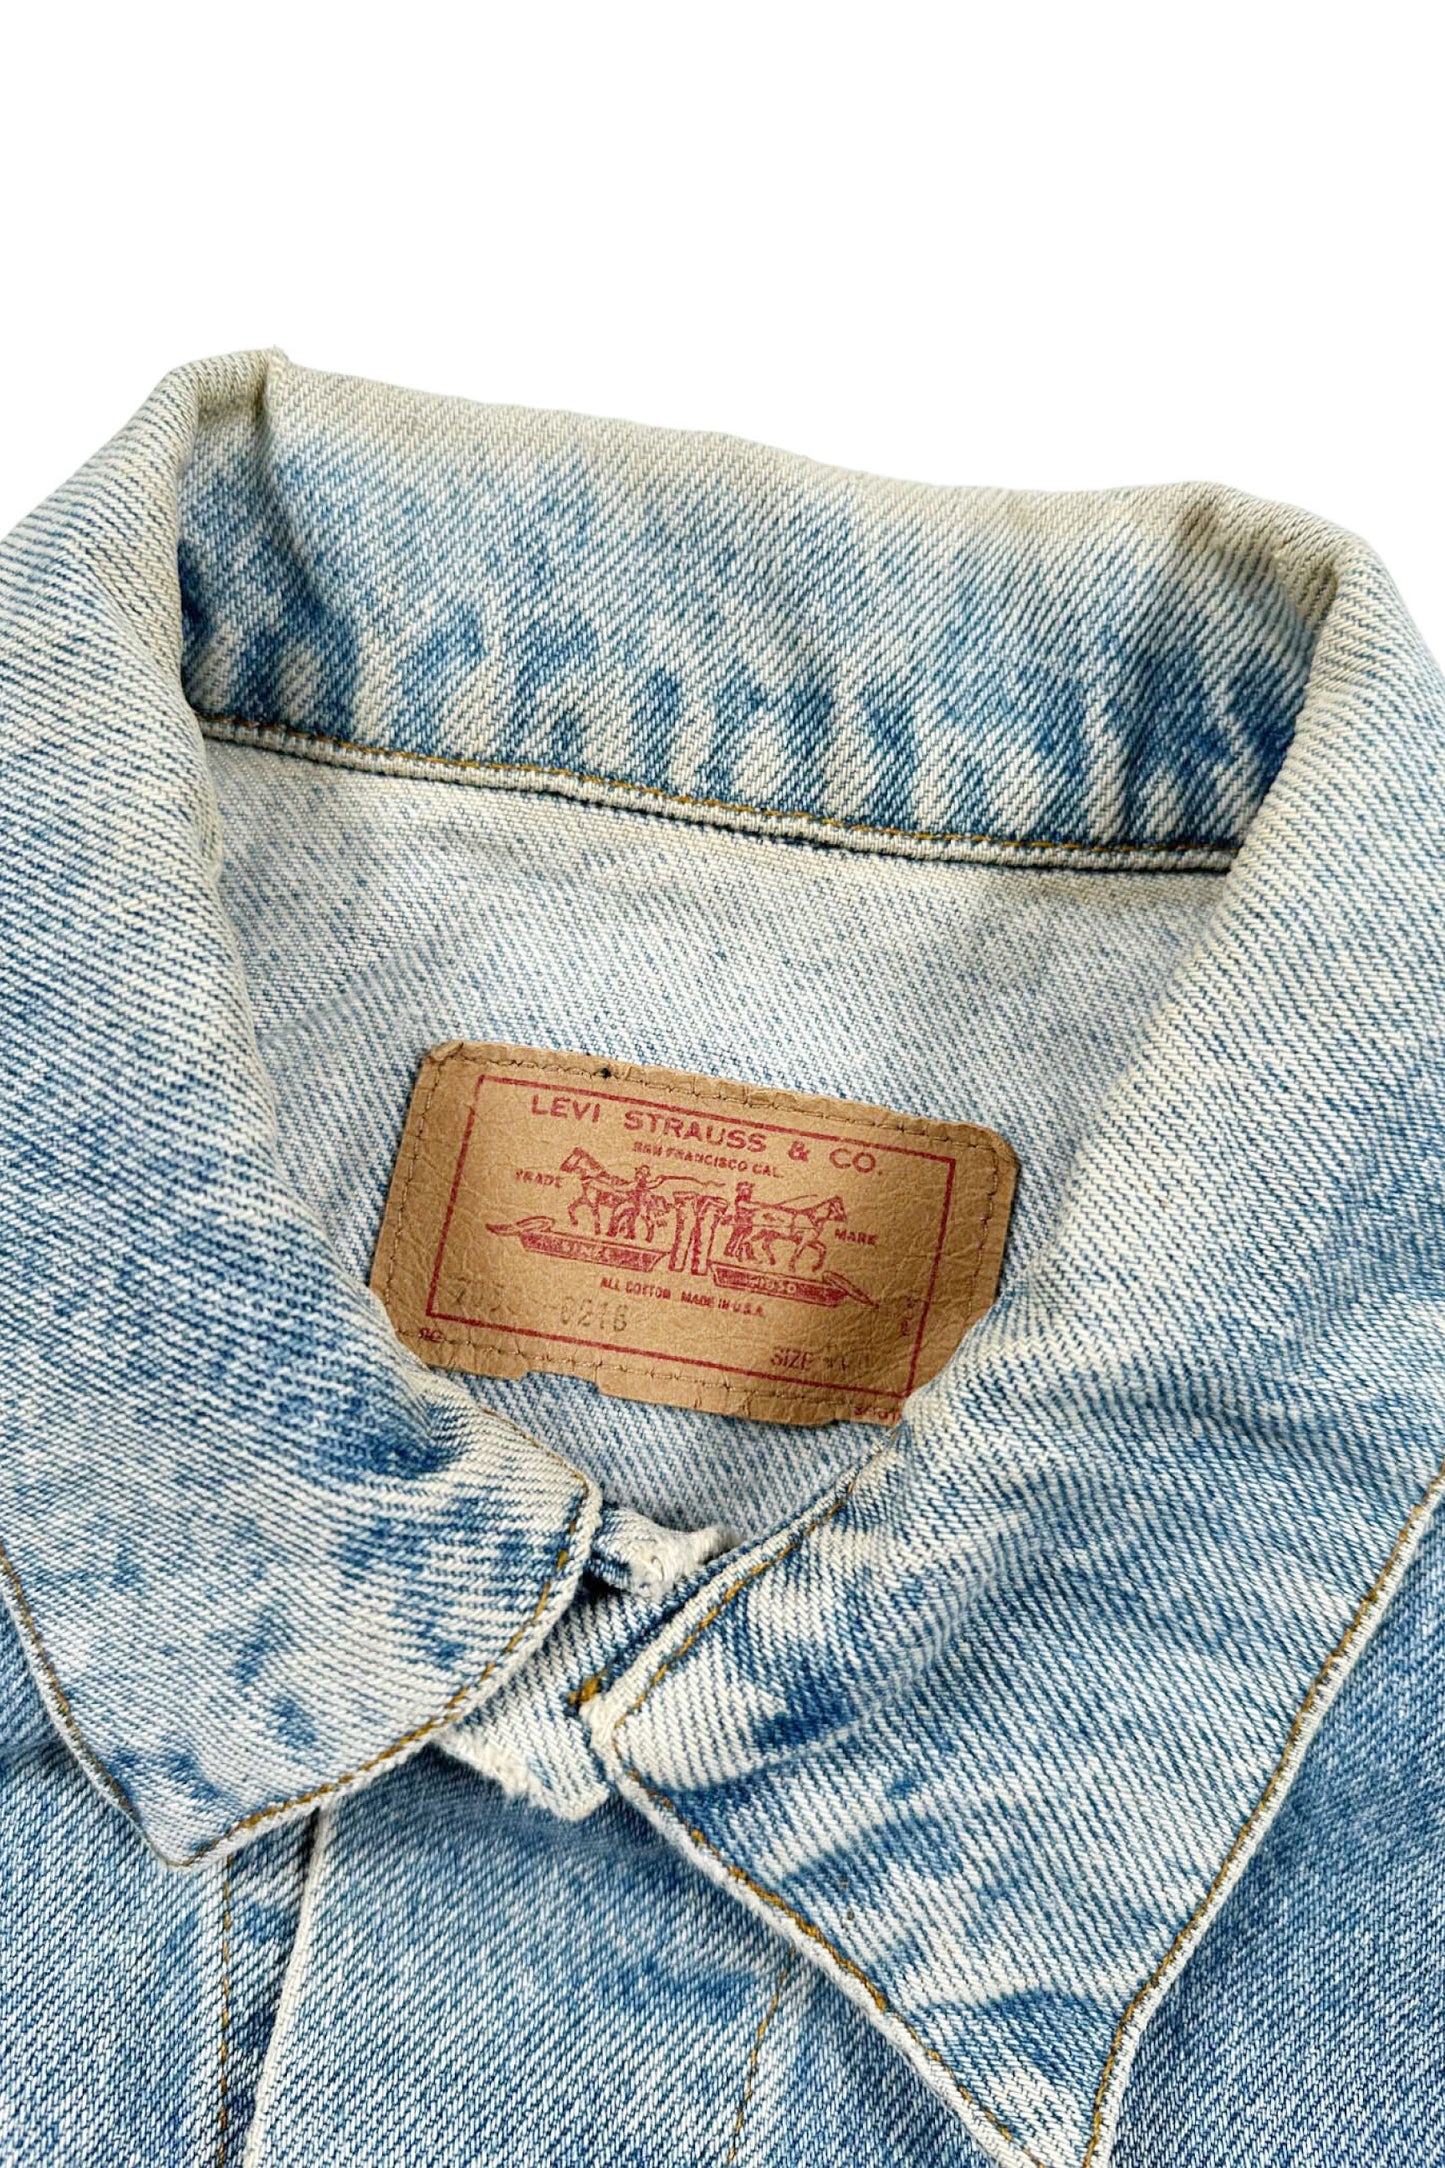 80‘s Made in USA Levi‘s denim jacket